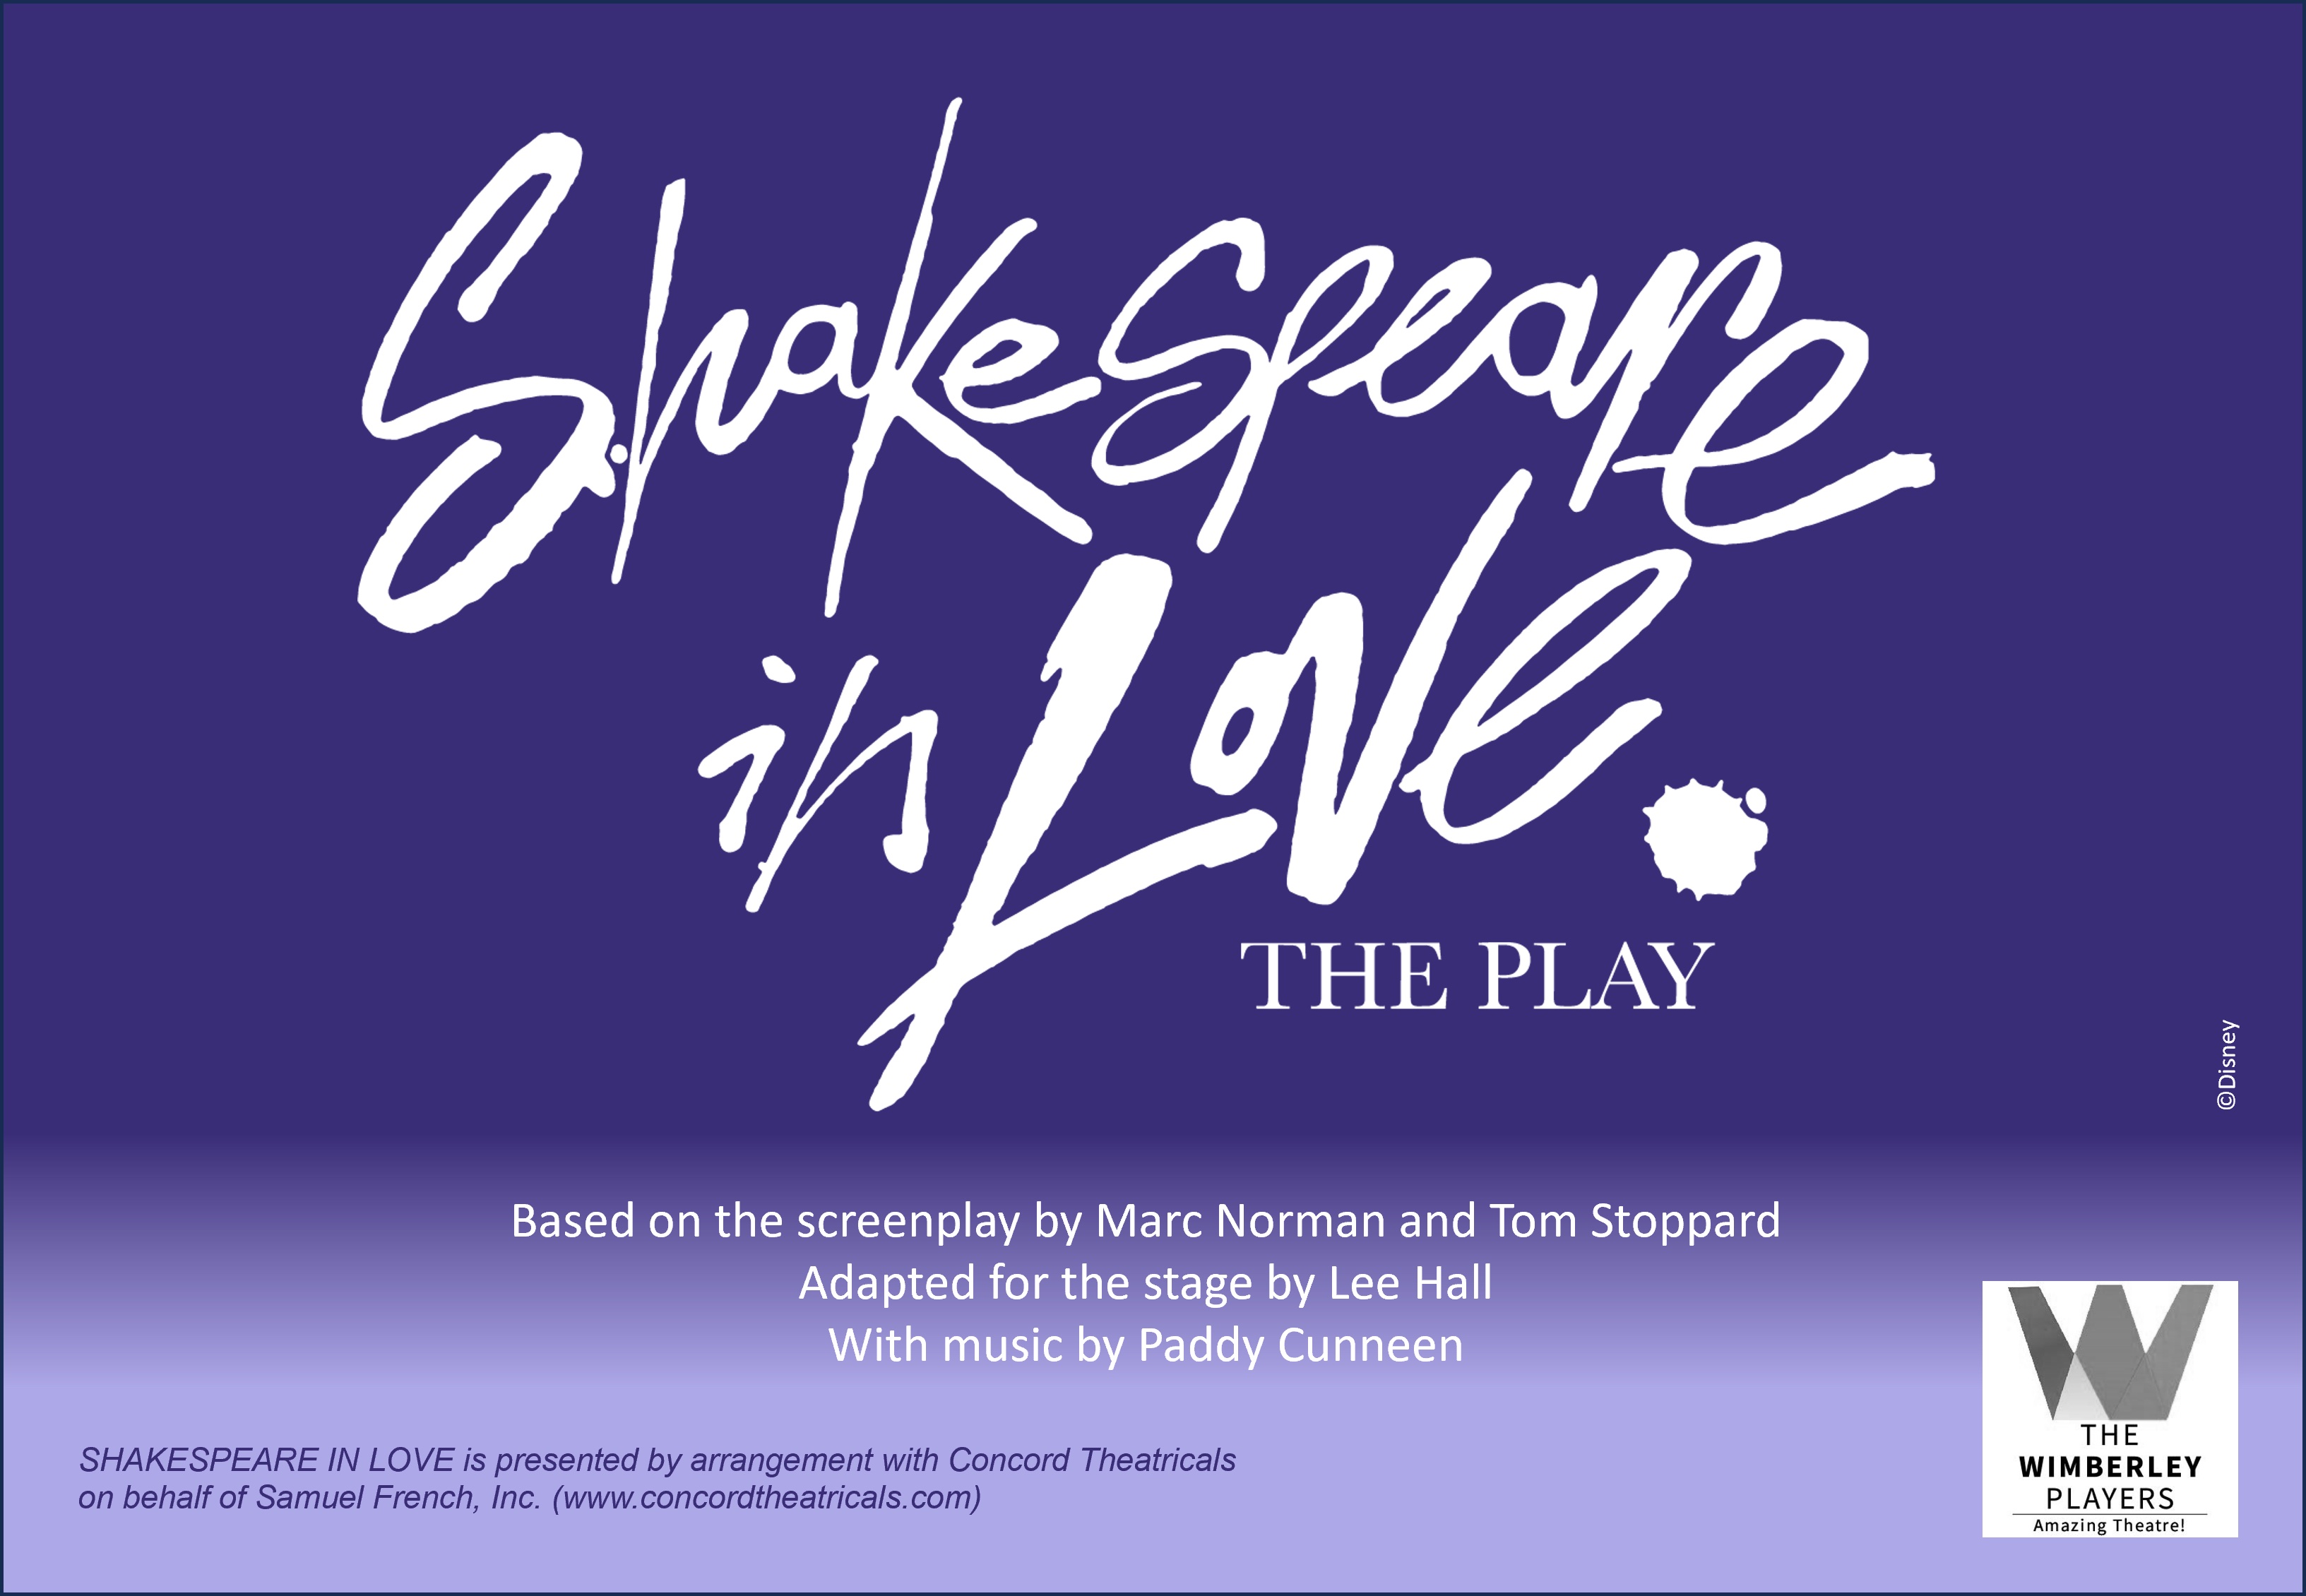 Shakespeare in Love by Wimberley Players